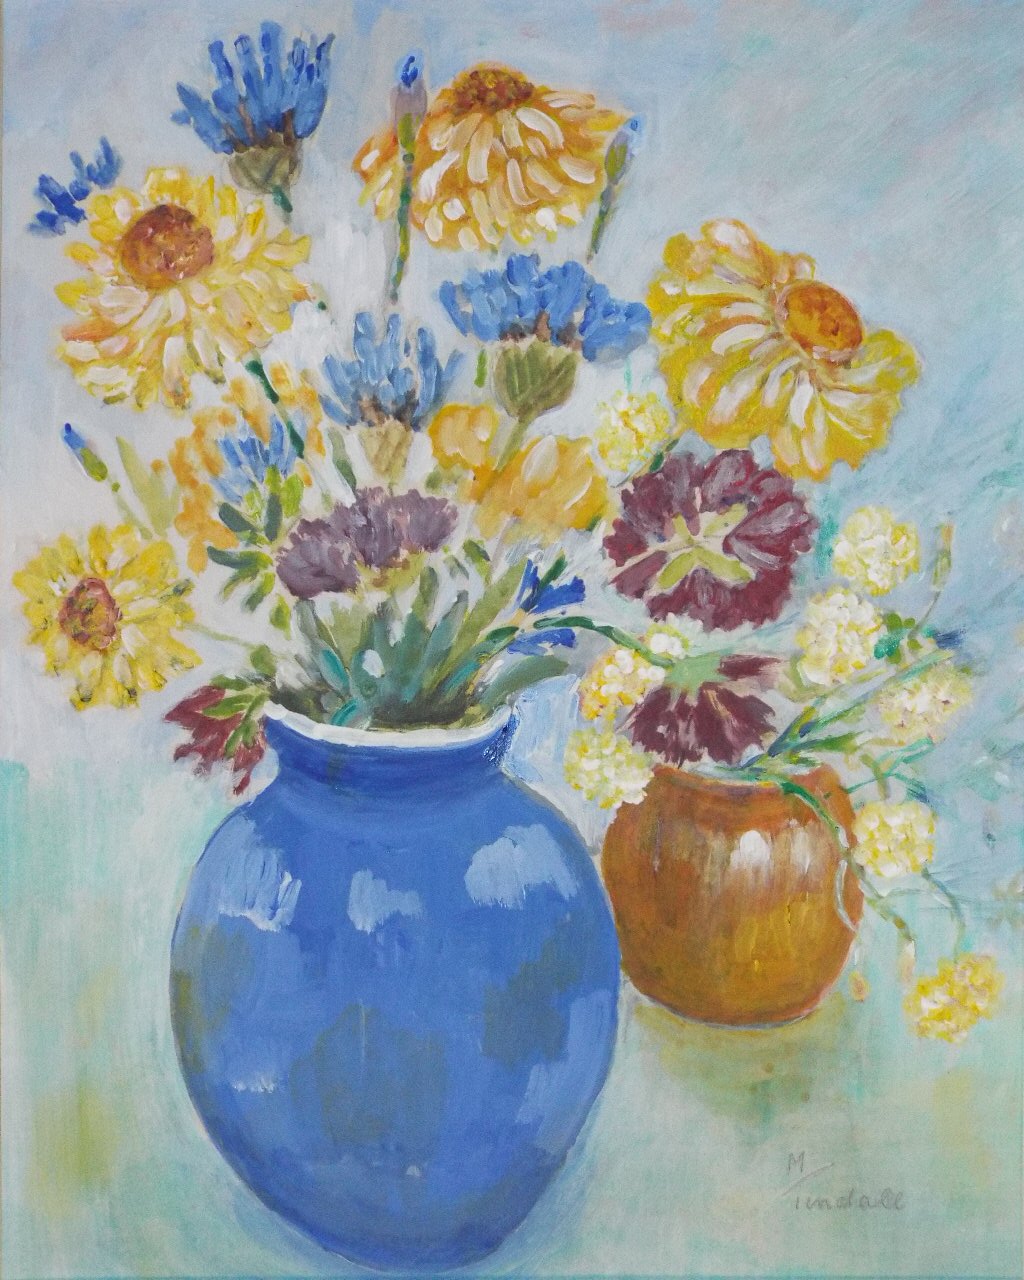 Oil painting - Blue Vase with Flowers